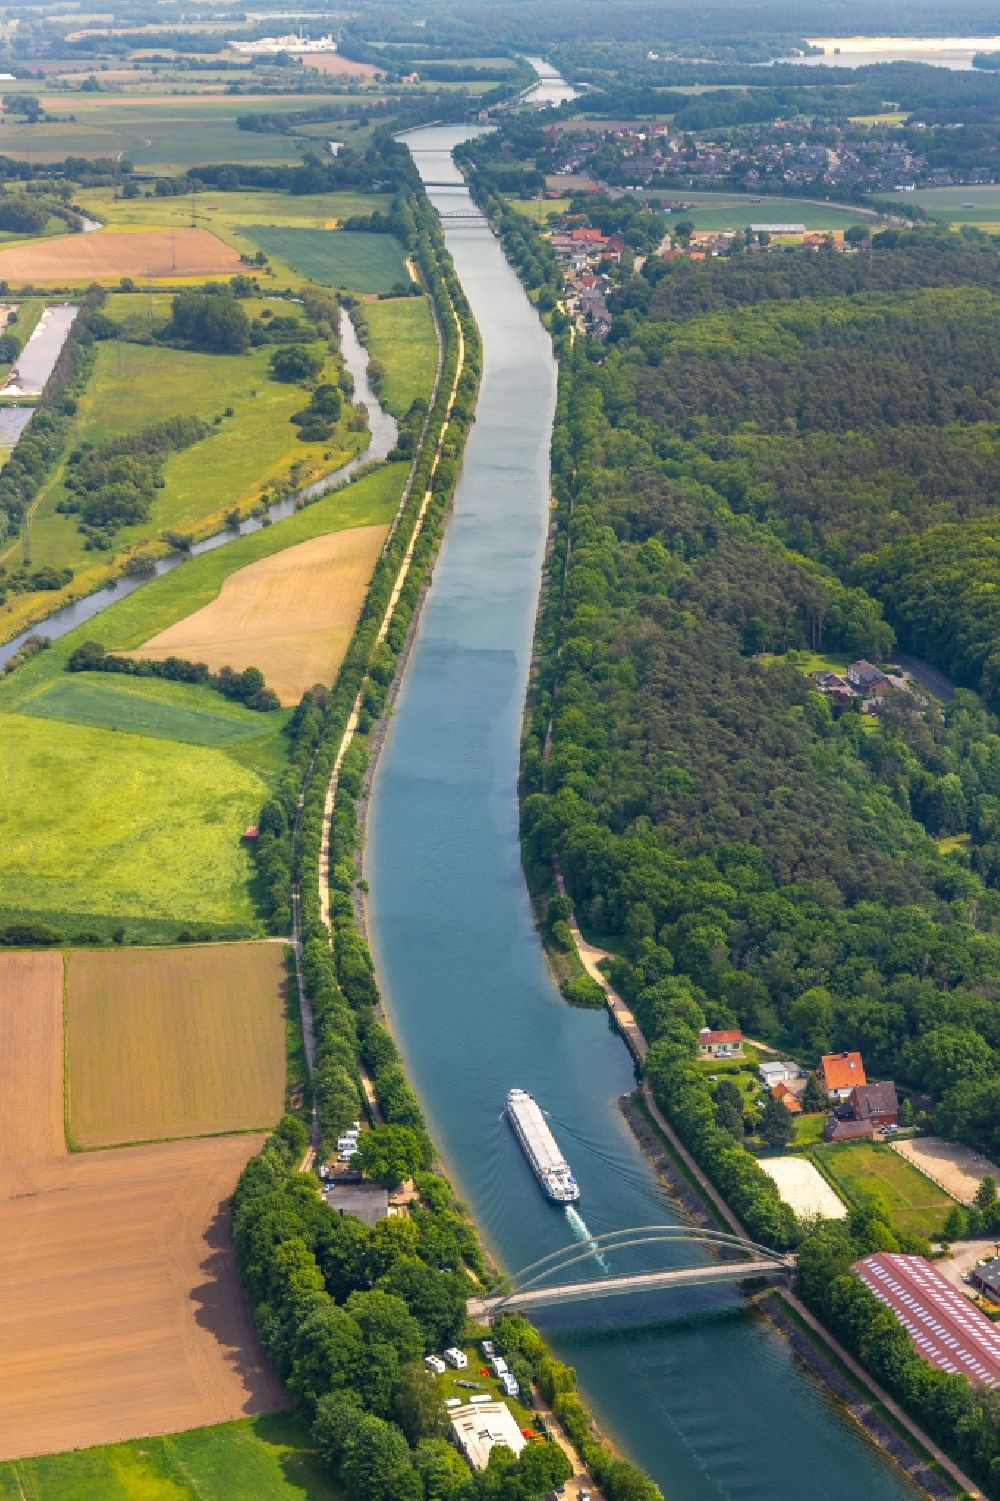 Aerial photograph Haltern am See - Cargo ship and bulk carrier on the river course of the Wesel-Datteln-Kanal in Haltern am See in the state of North Rhine-Westphalia, Germany